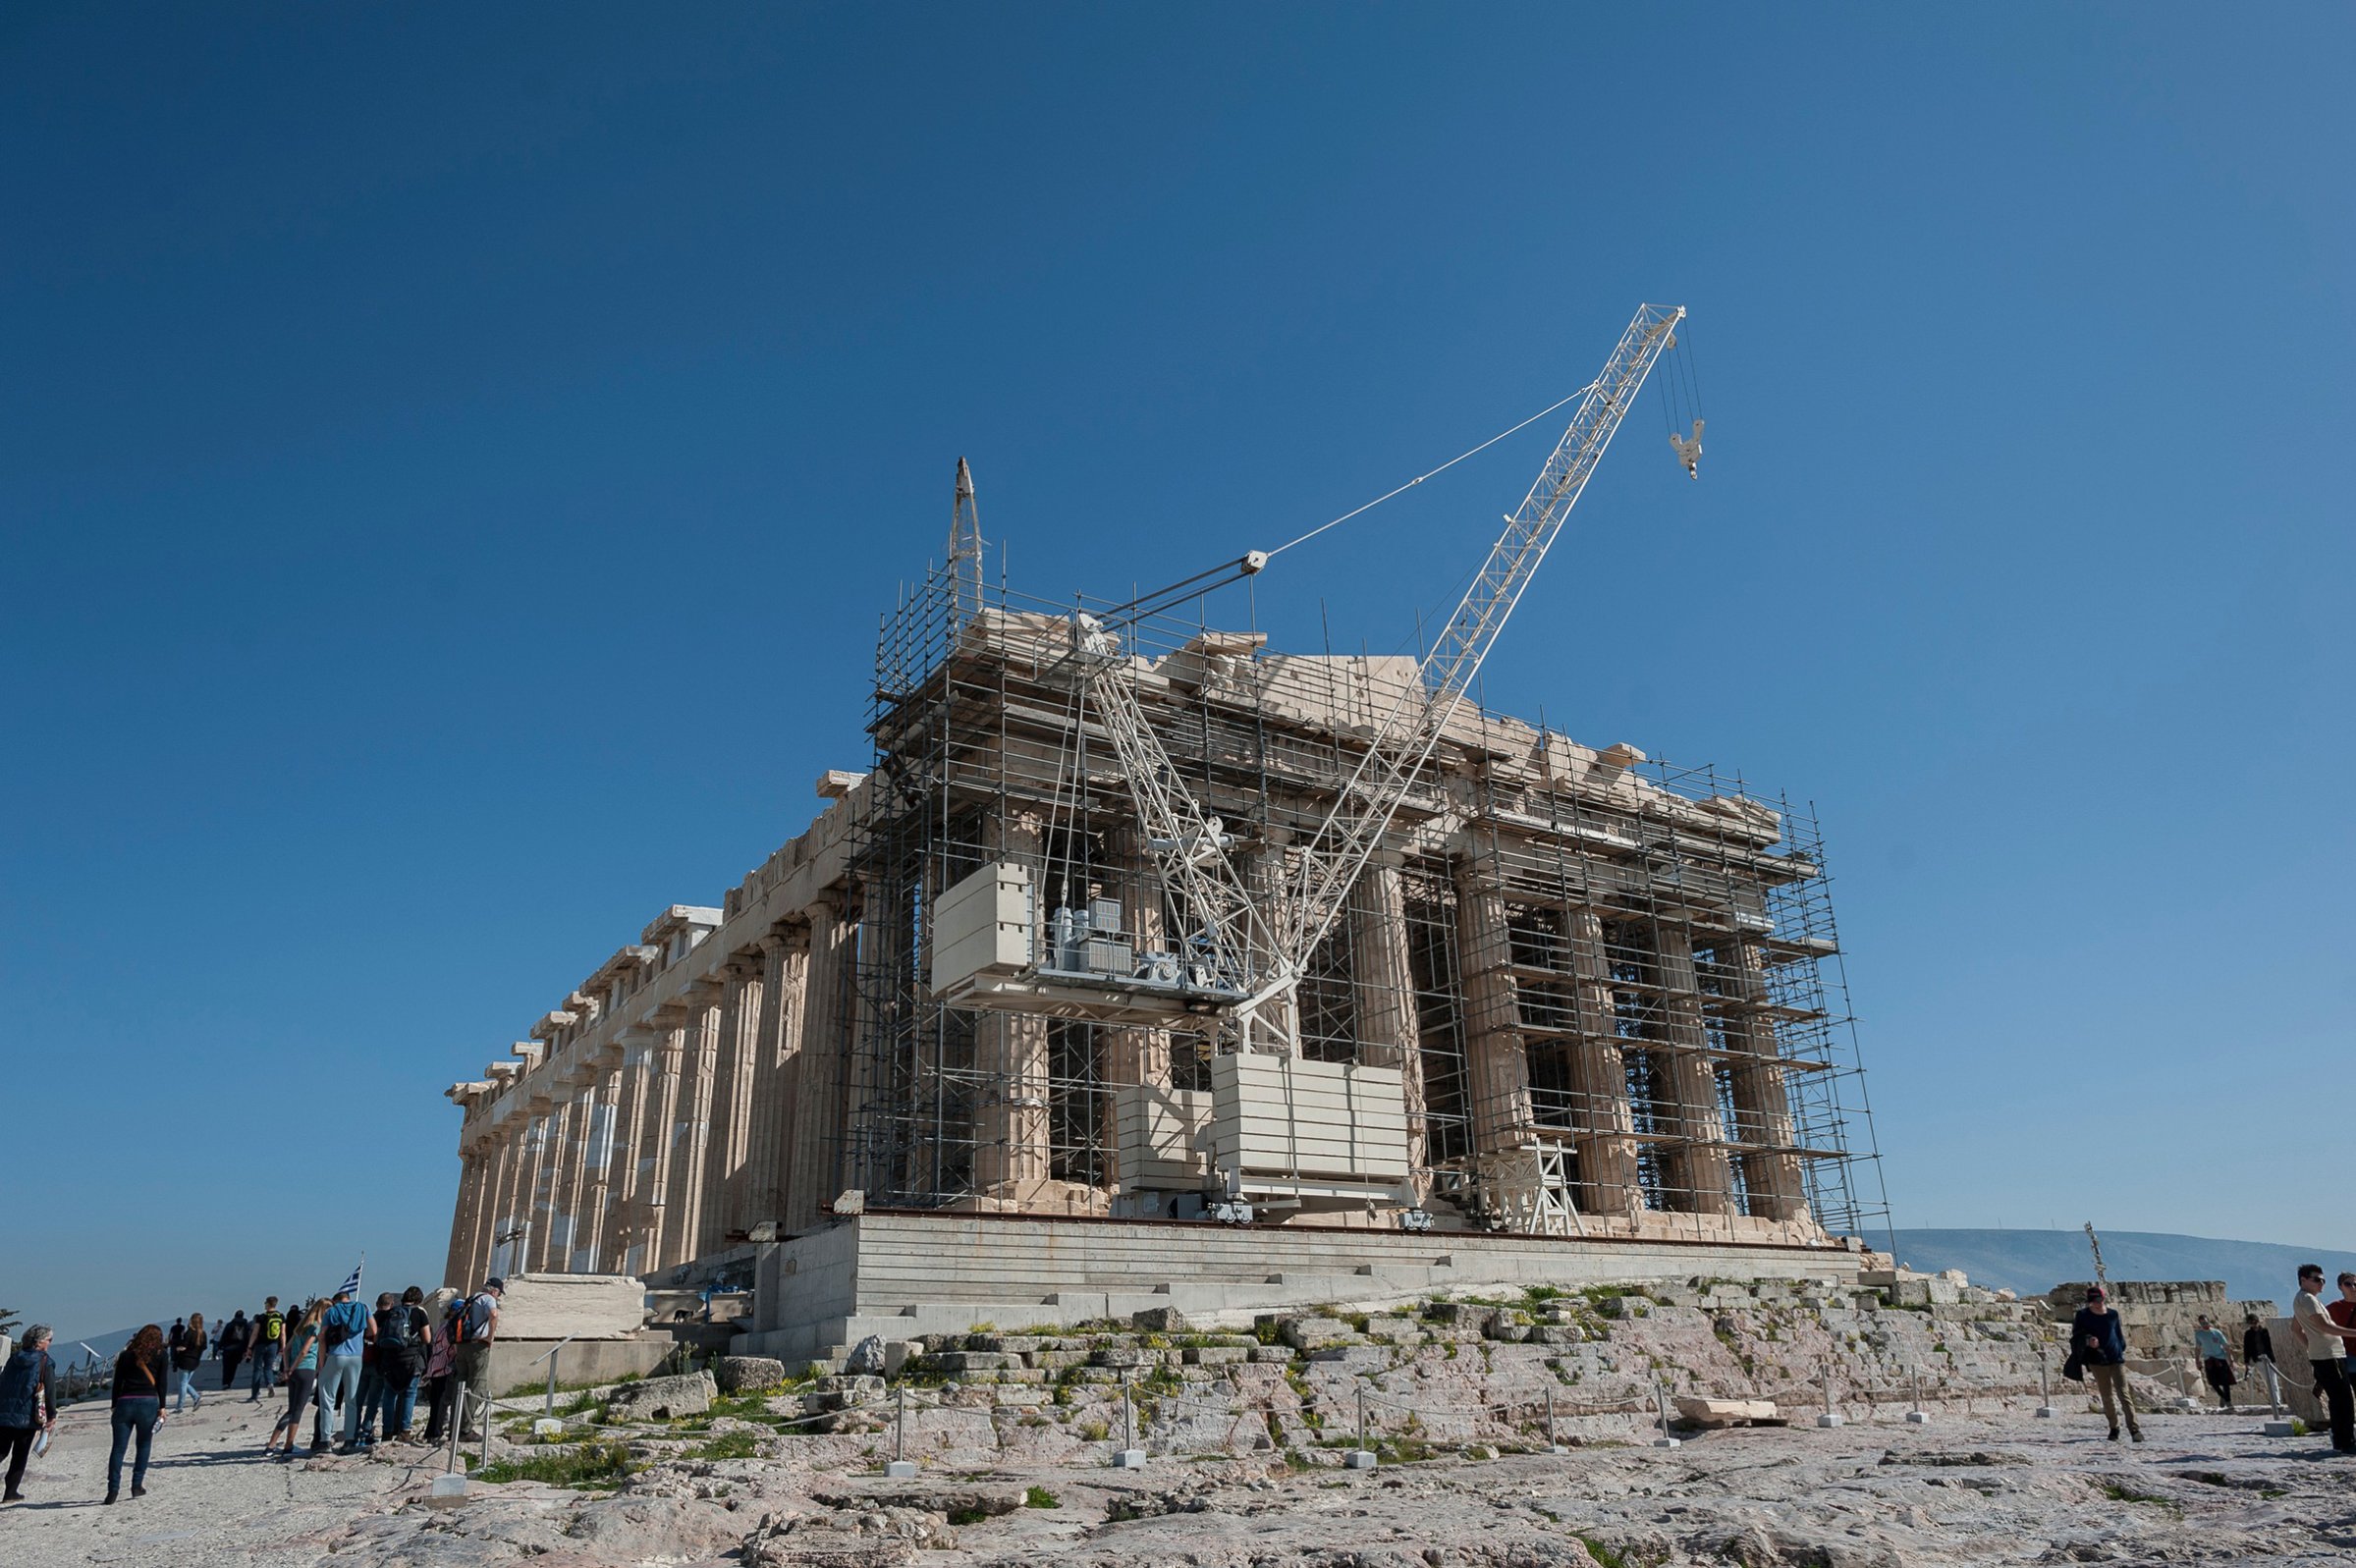 Work on the Acropolis is expected to continue through 2020